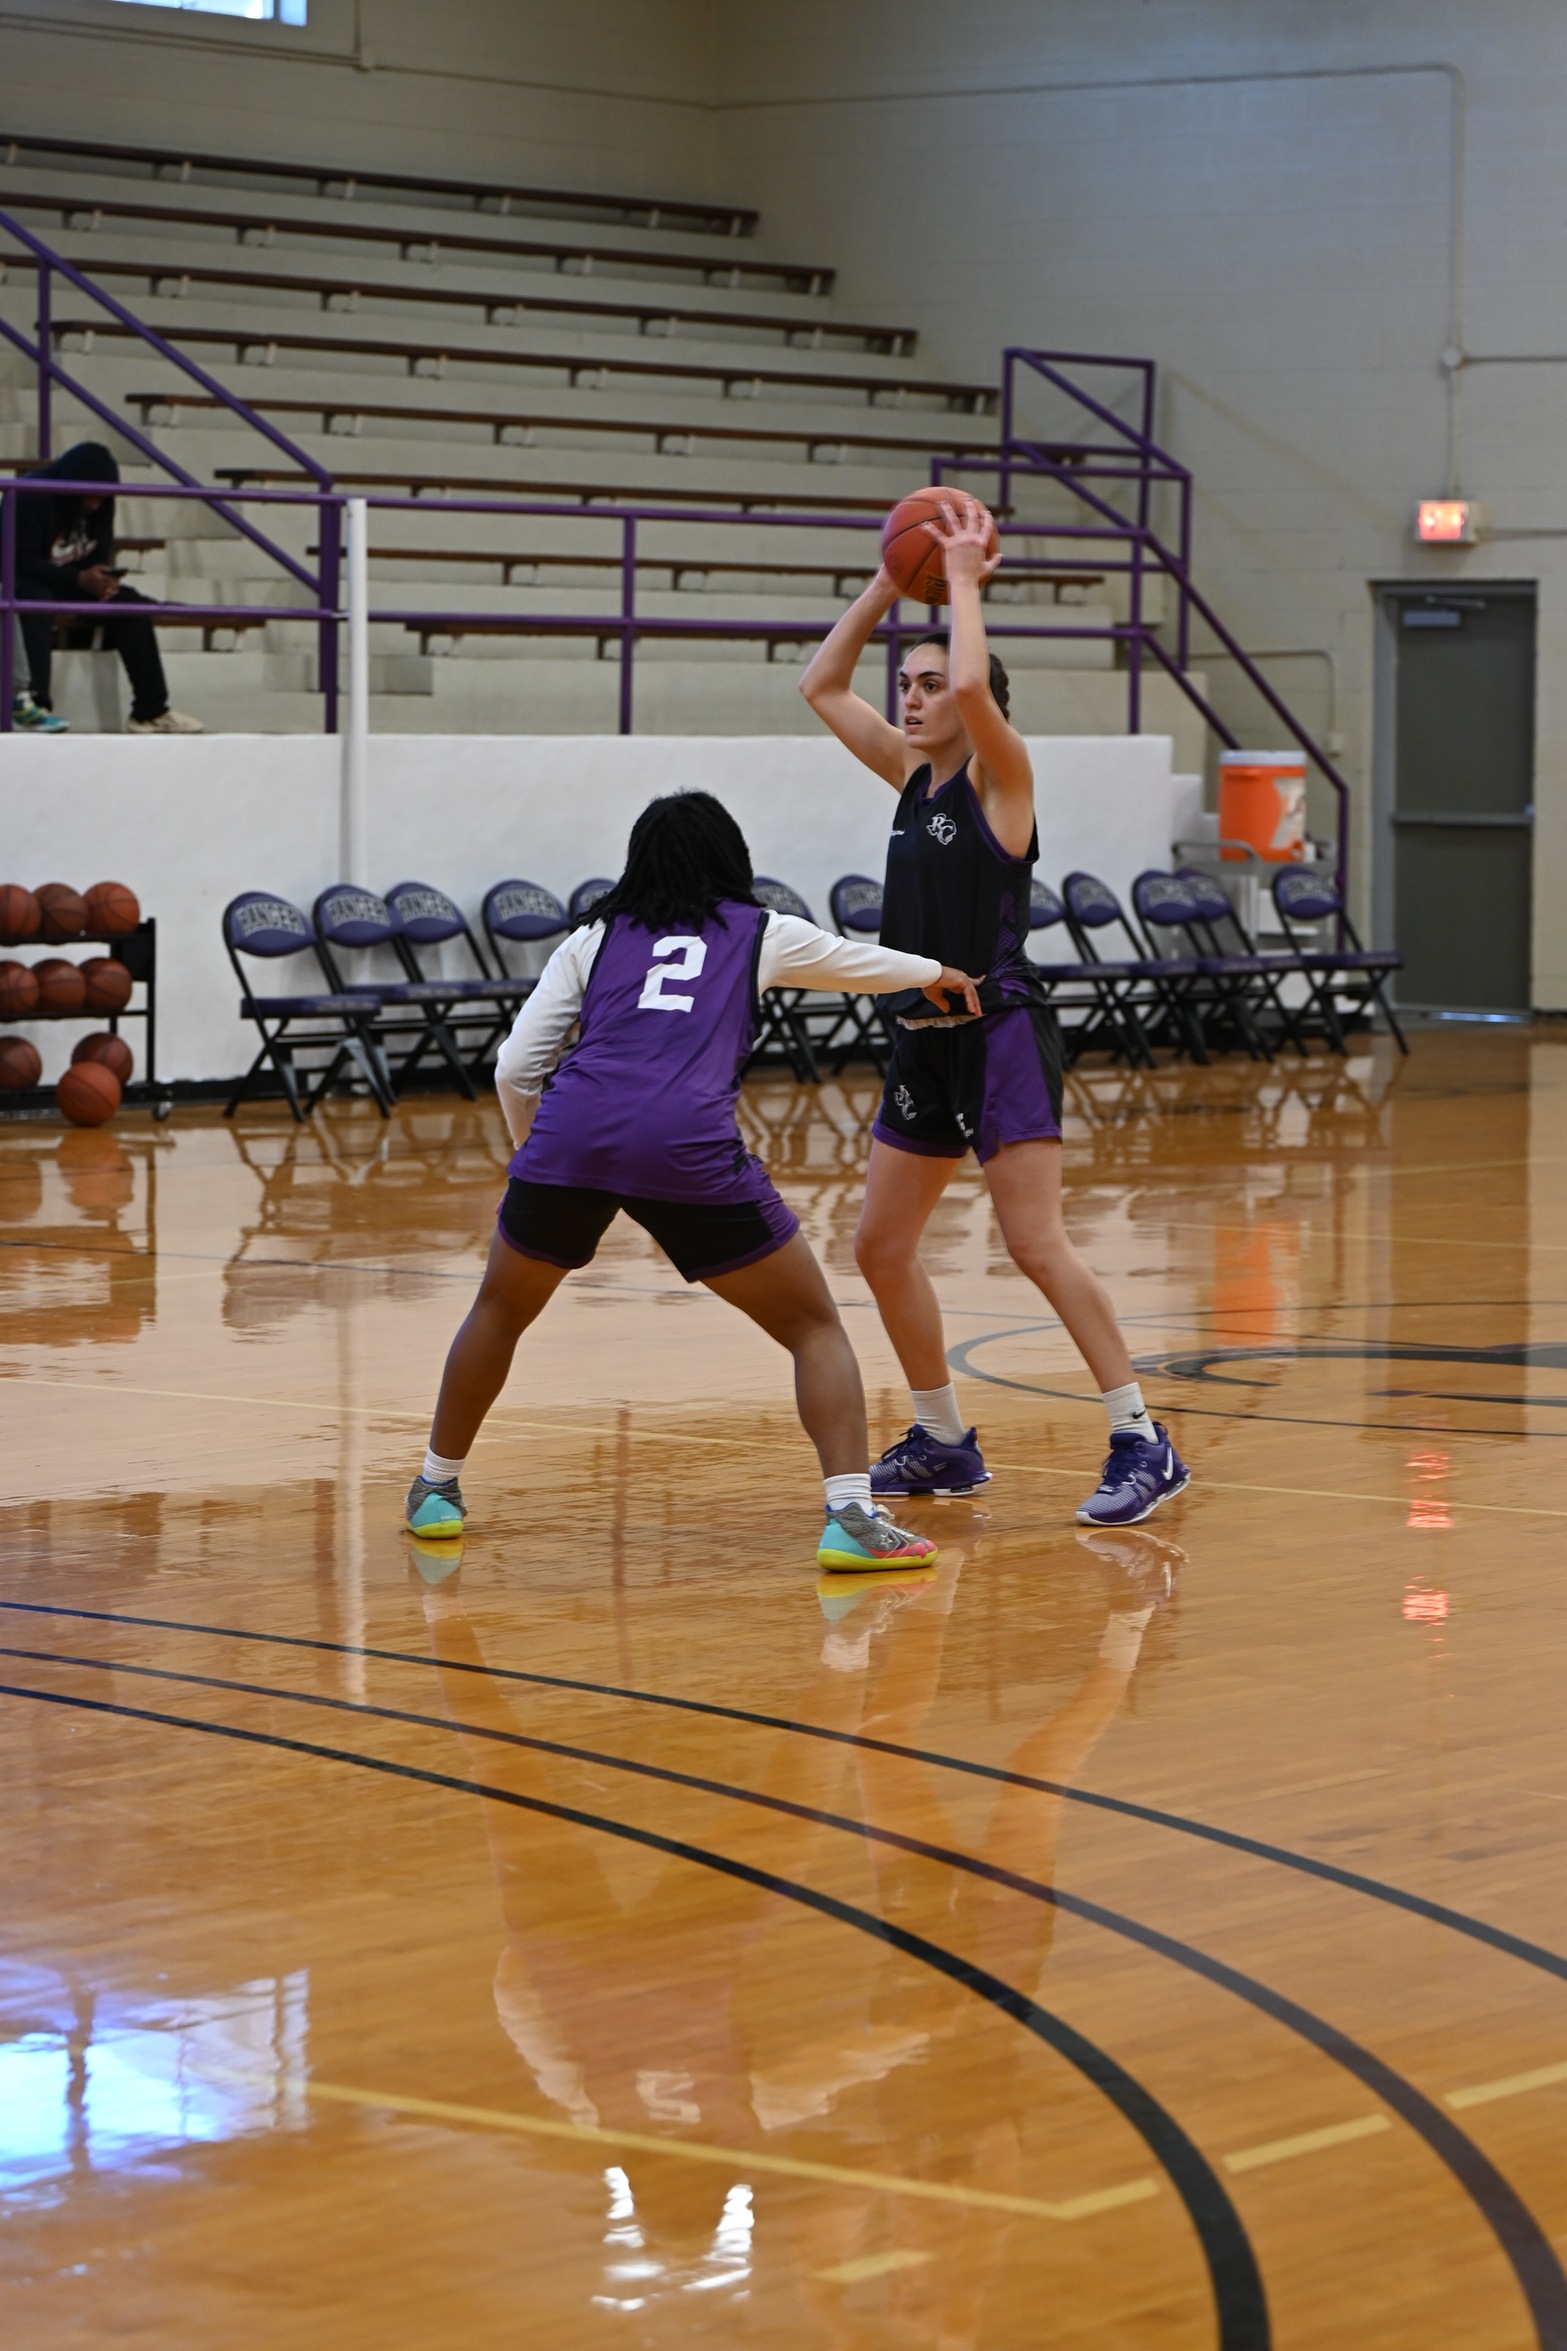 Ranger College narrowly defeated Southwestern Christian College with a final score of 52-49